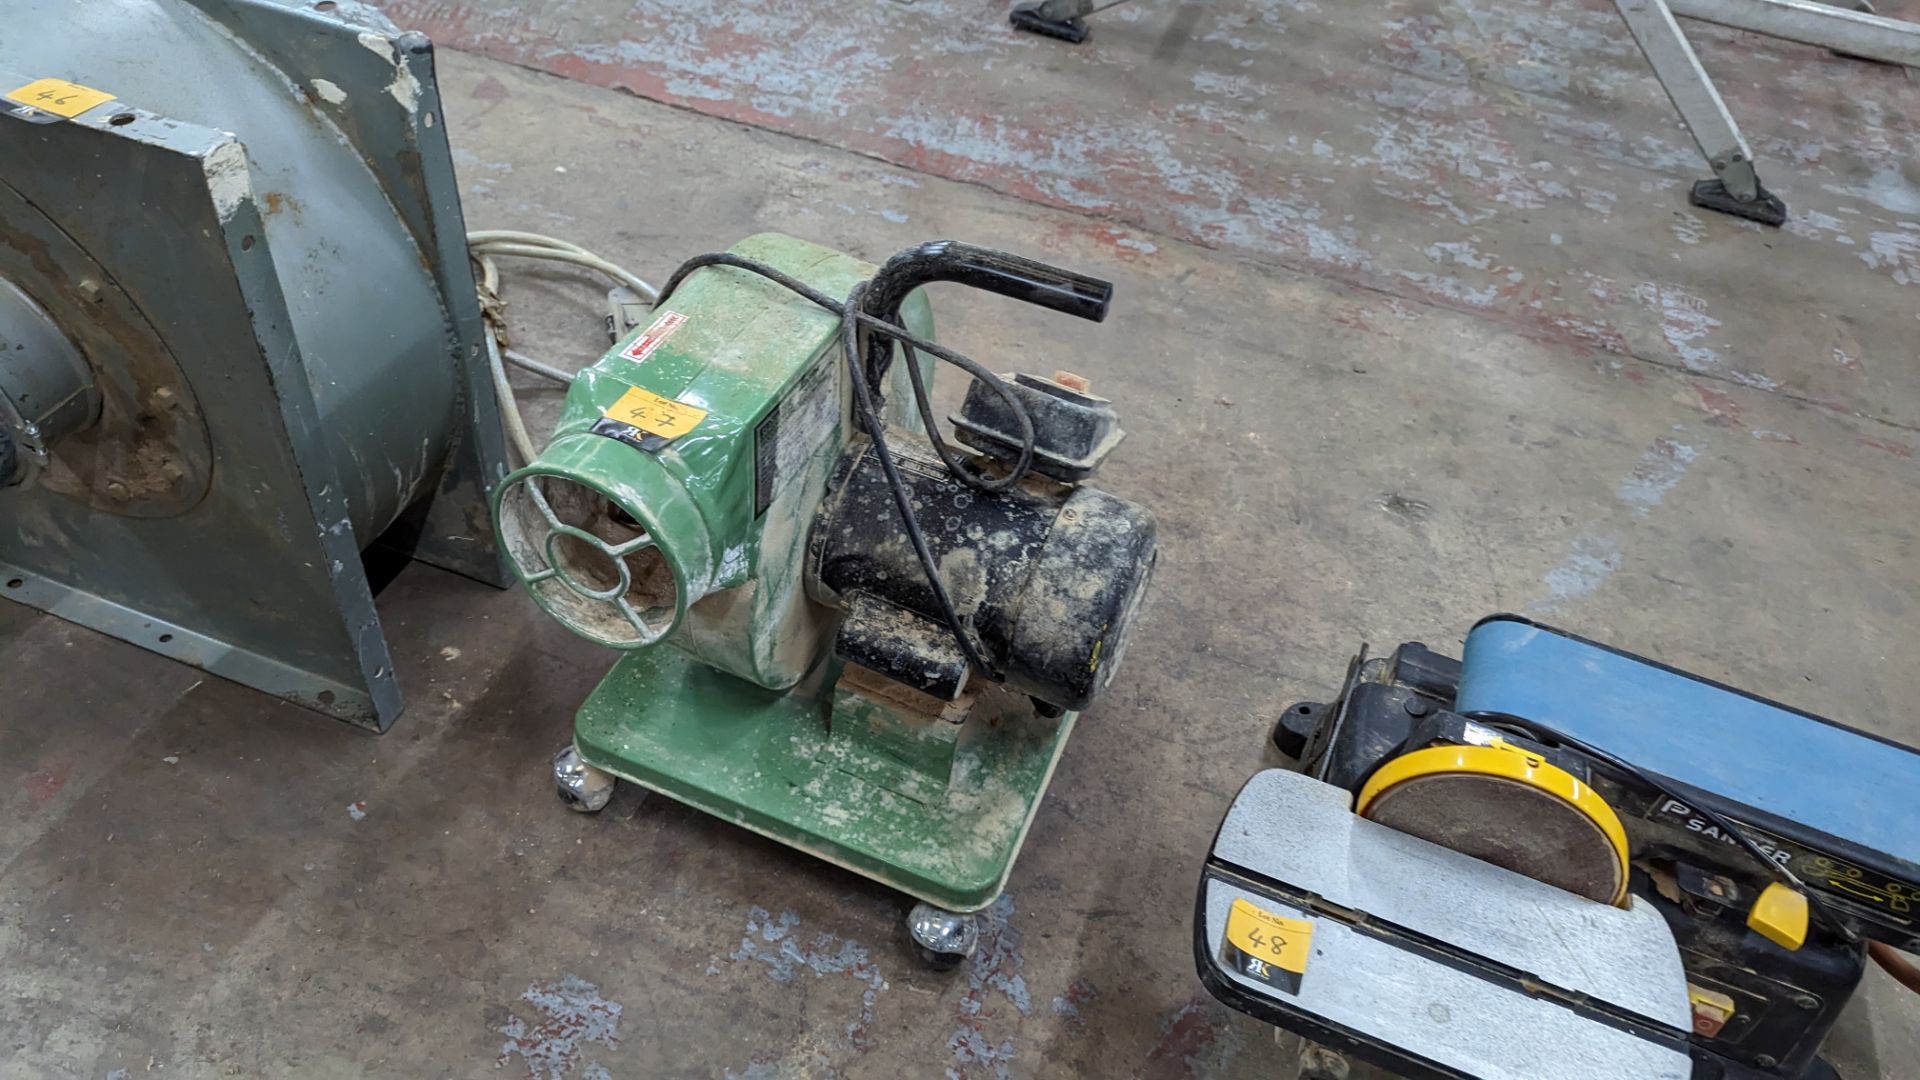 Sealey electric dust extractor model SM408